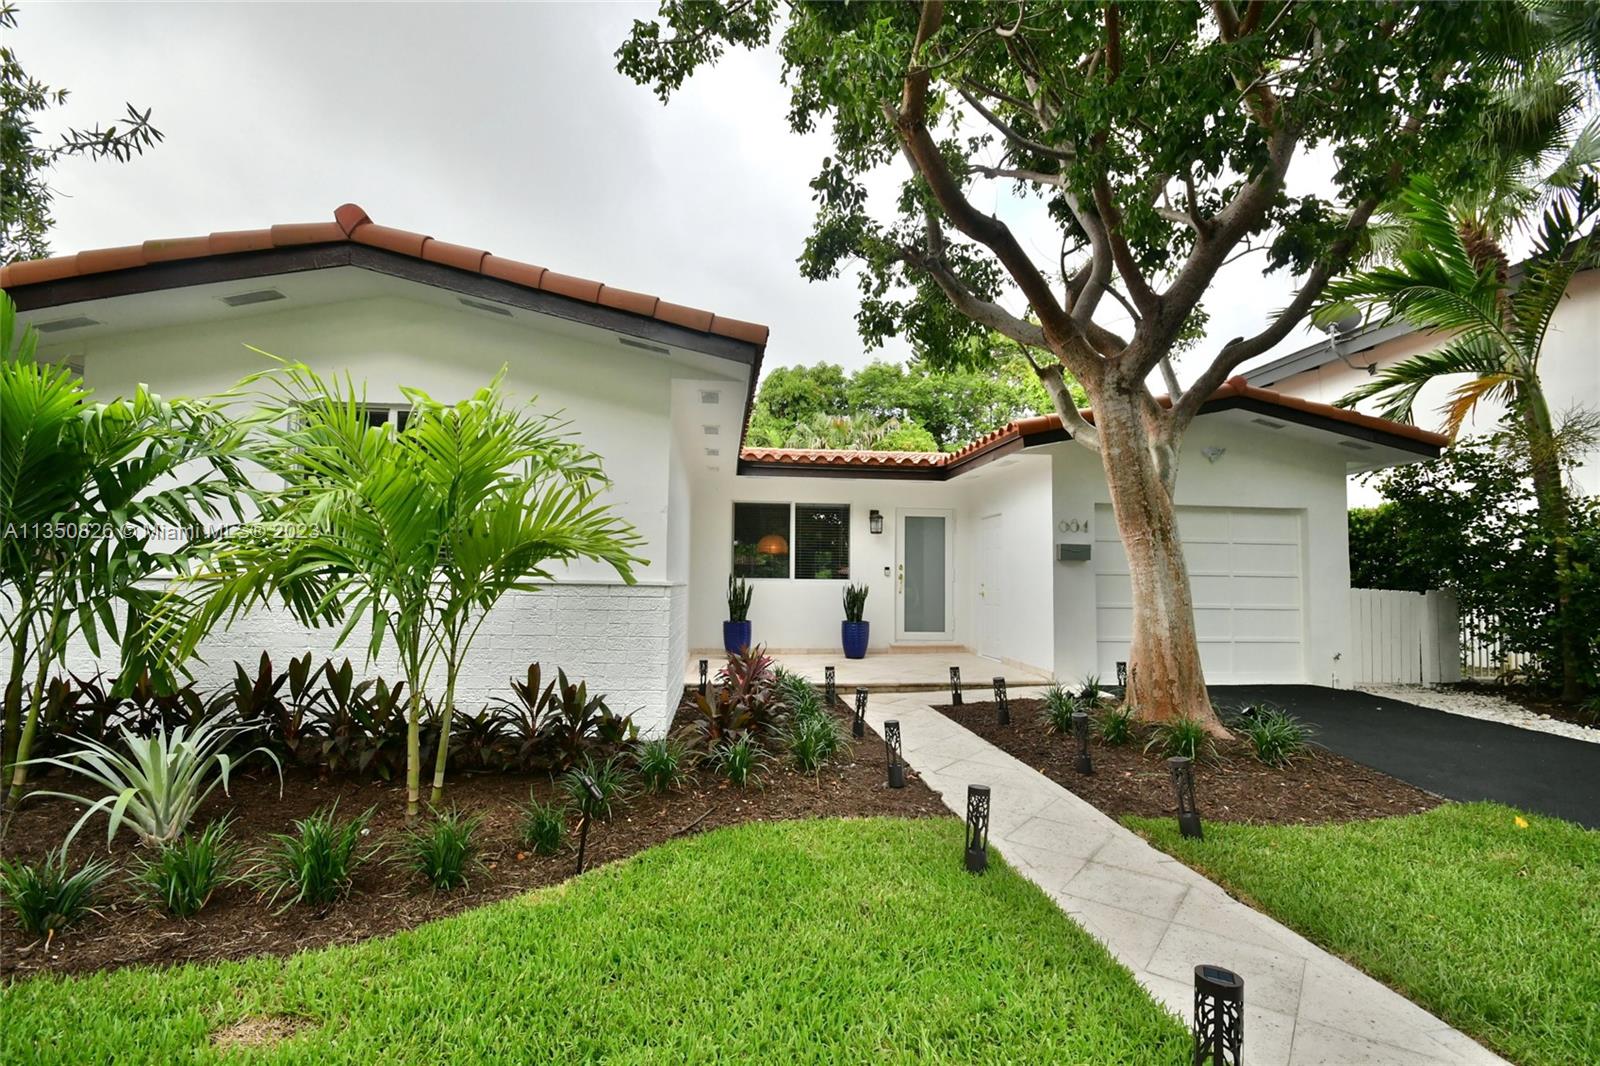 Priced to sell. Stunning renovated contemporary 3/2.5 home w/ beautiful high end finishes. Renovated baths and kitchen. New Roof March, 2019; New A/C March, 2017; Impact windows & doors; painted inside & out. Spacious open Living, Dining & Florida room w/marble flooring and flooded w/ natural light leading to the serene private backyard. Fabulous 200+ SQ FT Chef's Eat-In Kitchen w/ large windows, French door, stainless steel Island, double oven, custom cabinetry & imported Spanish porcelain flooring. Laundry room & half-bath adjacent to kitchen. Spa like Master bath w/ dual sinks, faucets & flooring from Italy & dual rain shower heads. Walk to Shops @ Merrick Park, Coral Gables library and Youth Center. Enjoy the tranquil neighborhood steps from the home for exercising and enjoying nature.